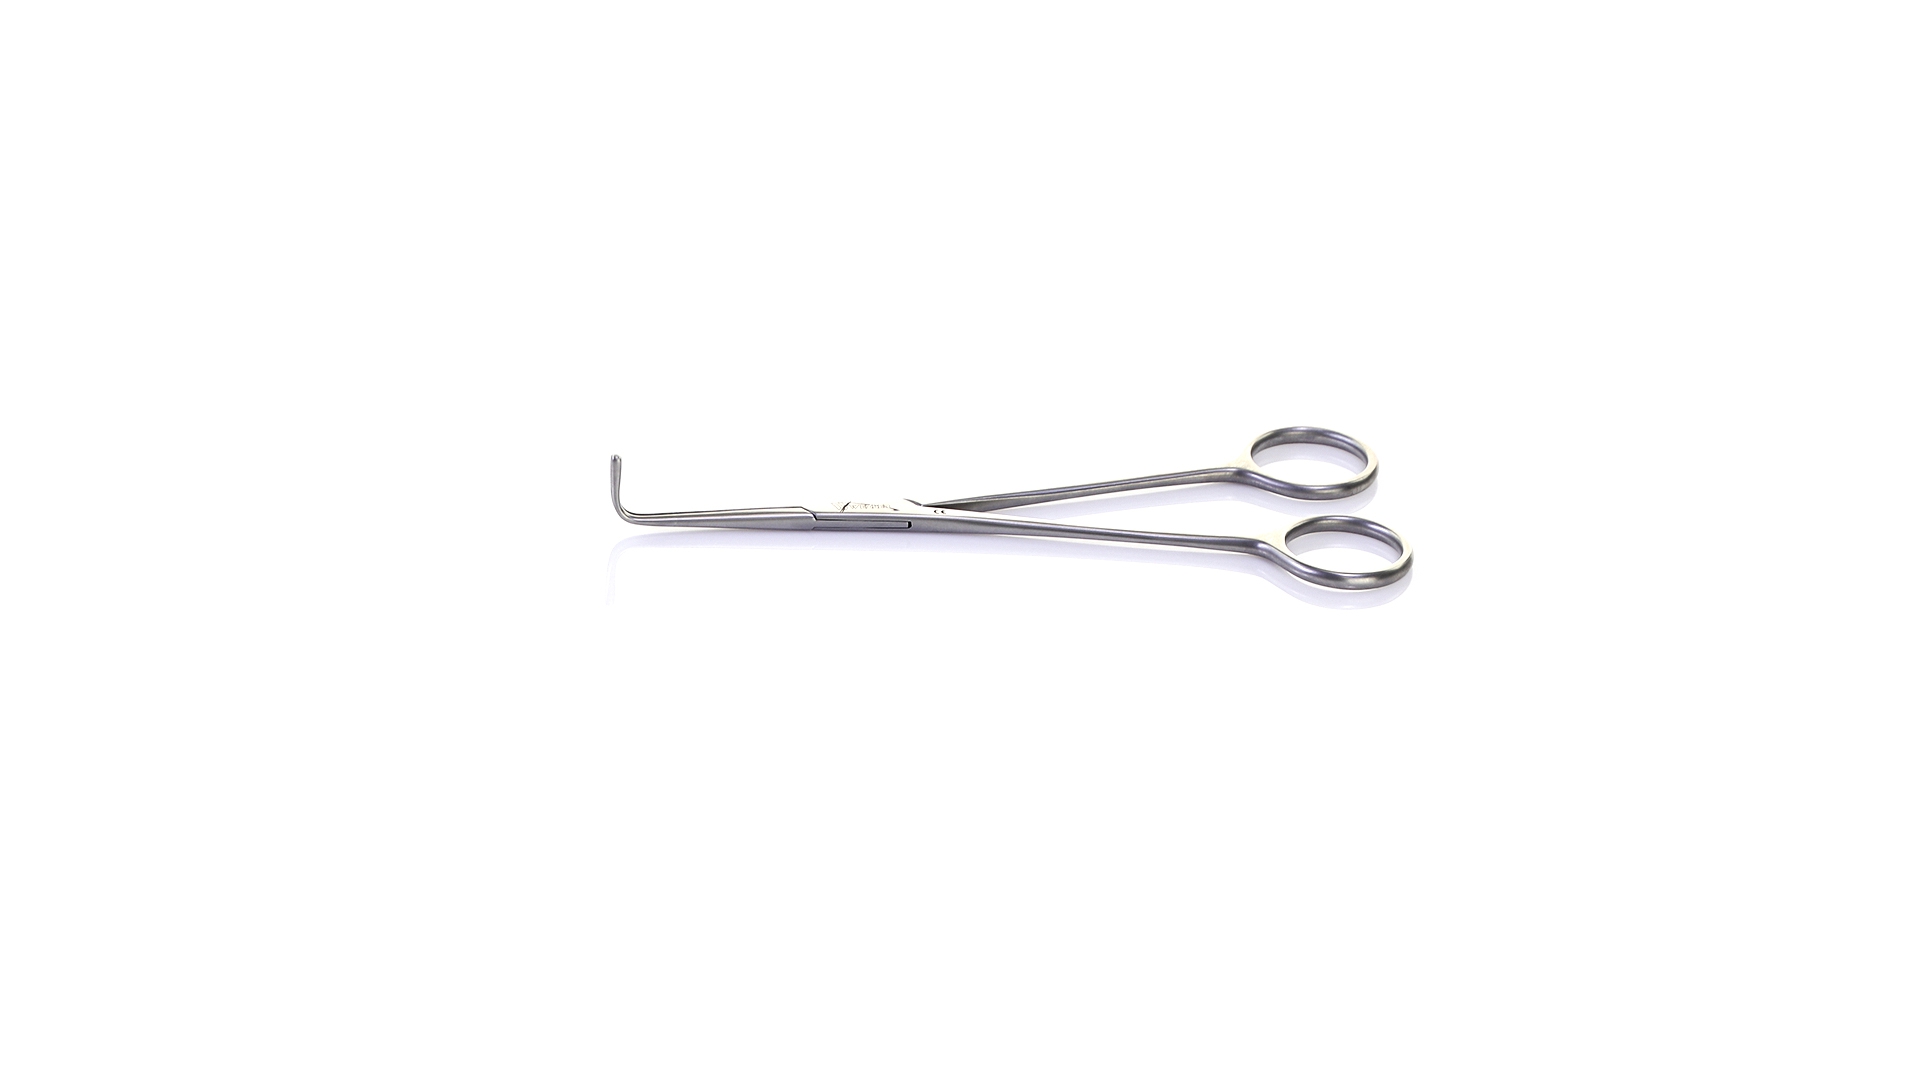 Waterson's Dissector - 90° Angled Delicate serrated jaws